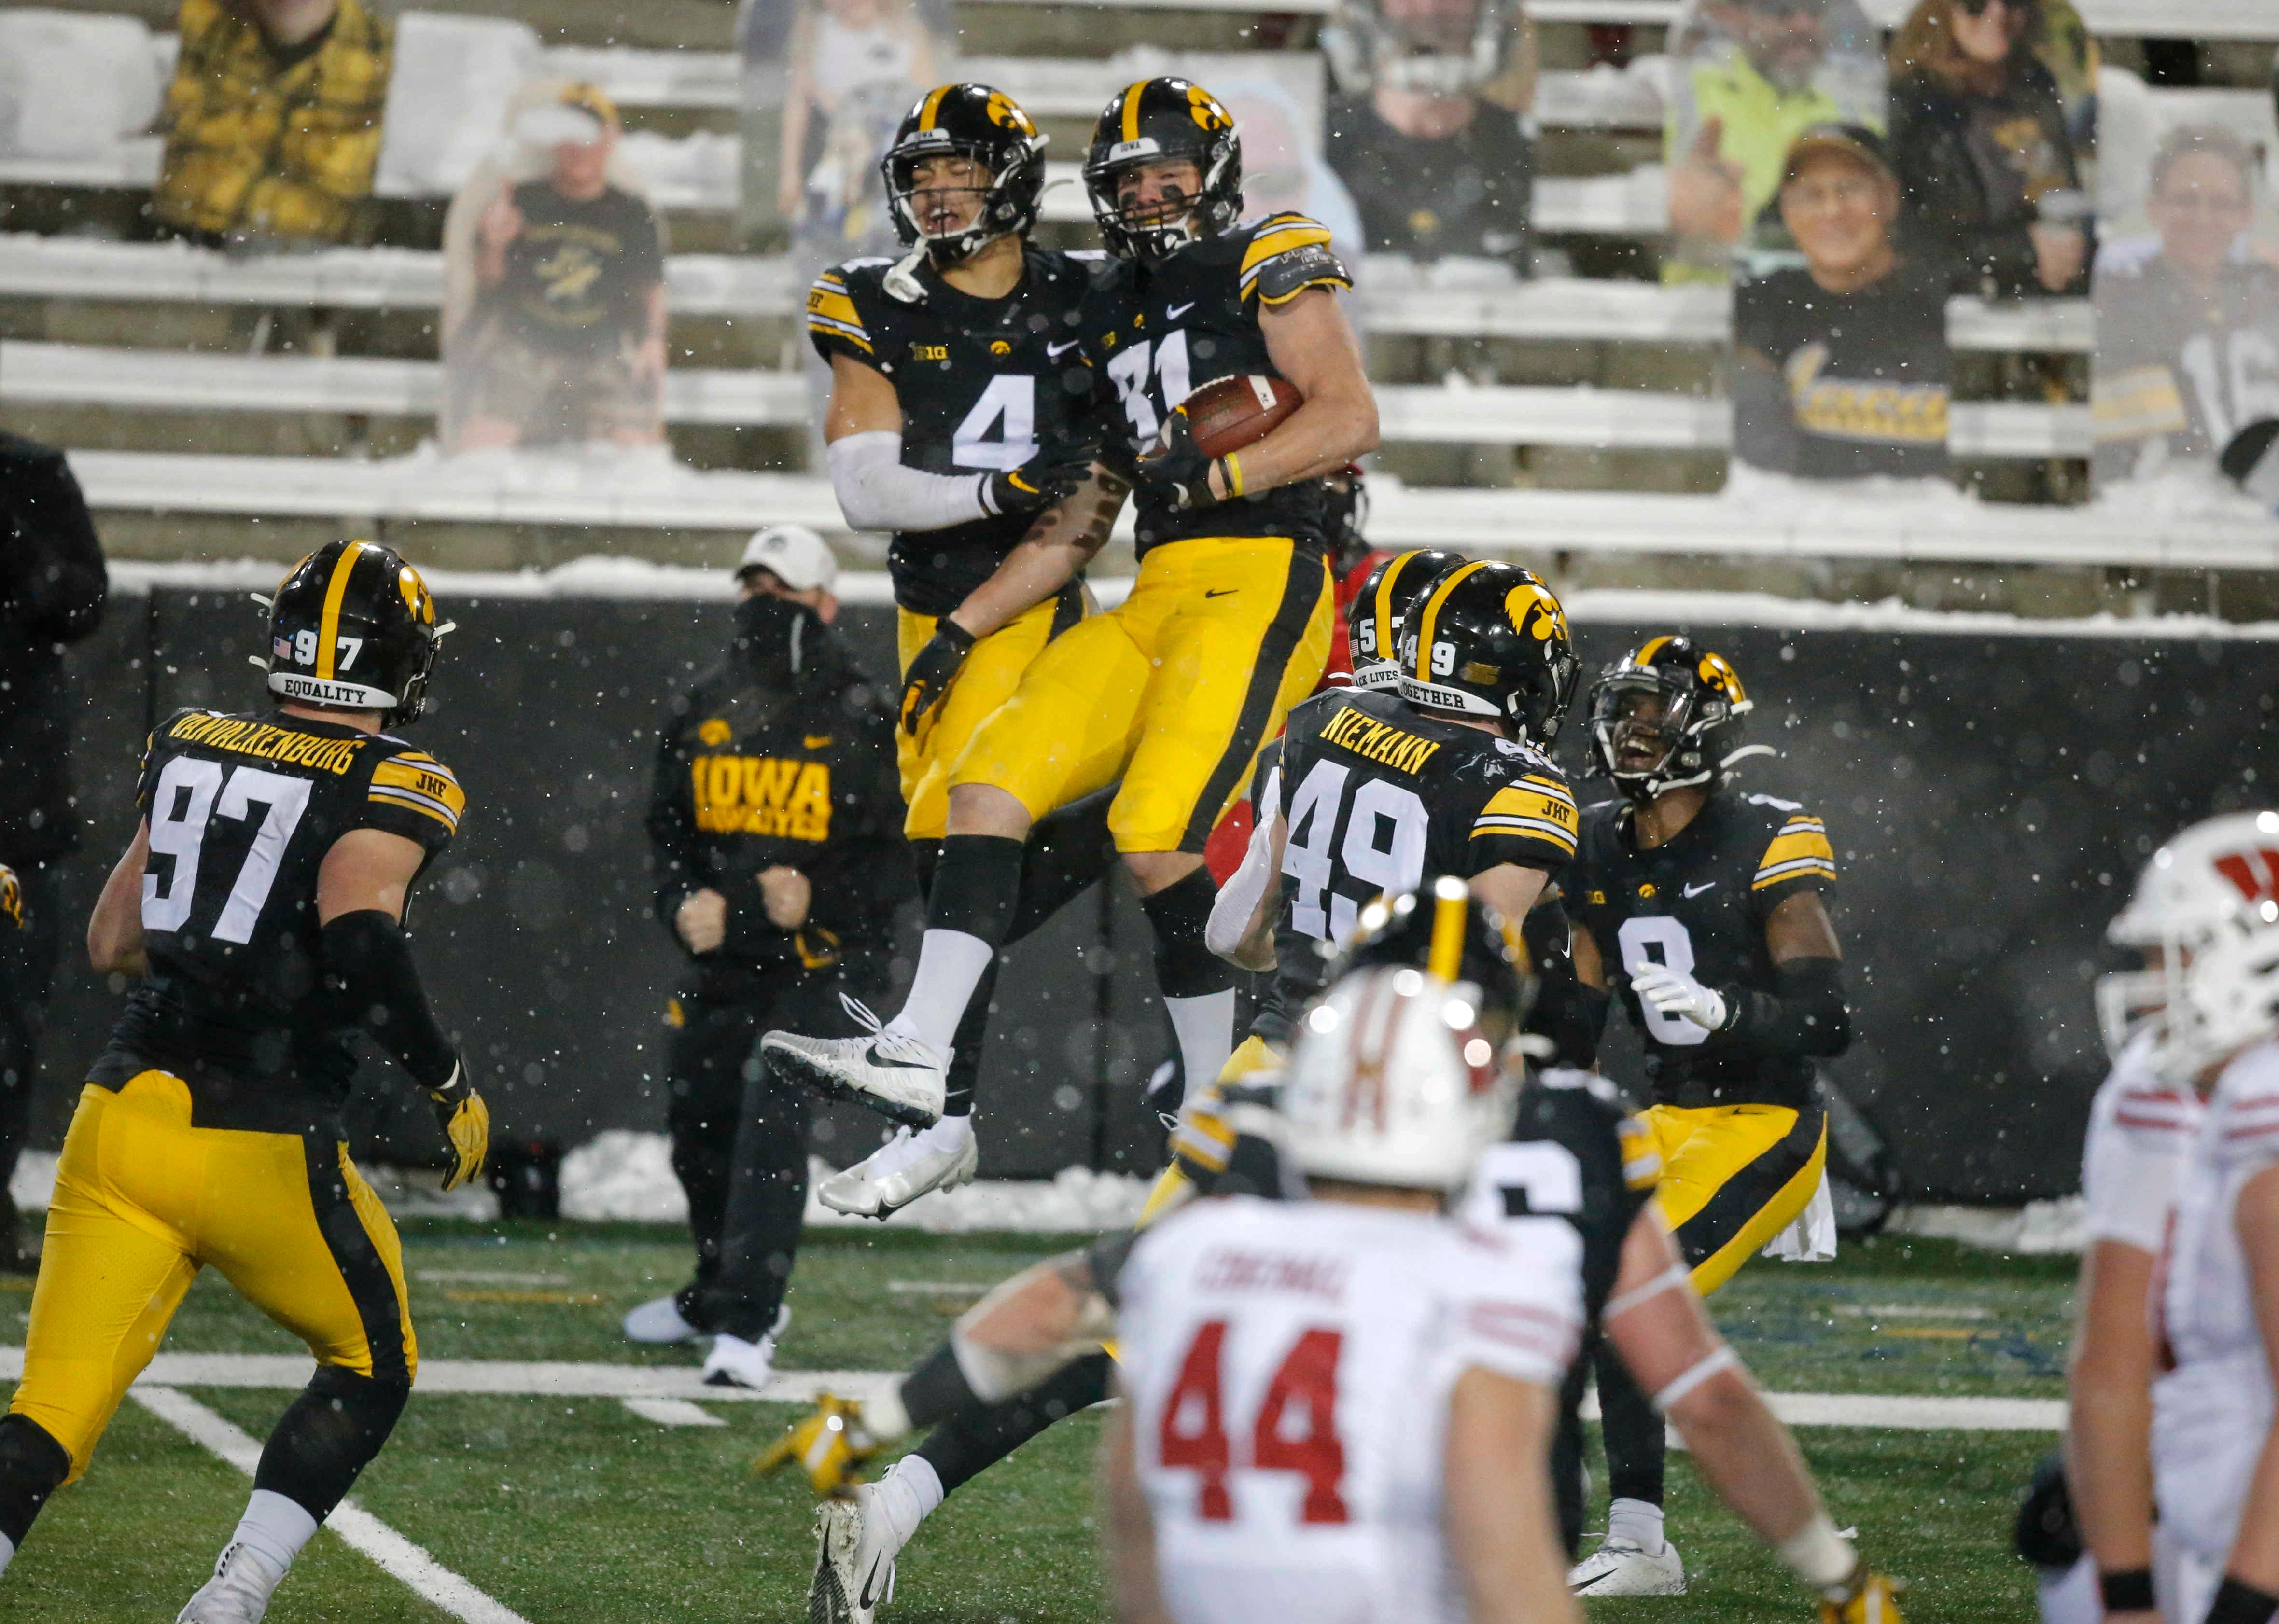 Iowa sophomore linebacker Jack Campbell, right, celebrates after coming down with an interception in the Wisconsin end zone in the fourth quarter on Saturday, Dec. 12, 2020, at Kinnick Stadium in Iowa City, Iowa.